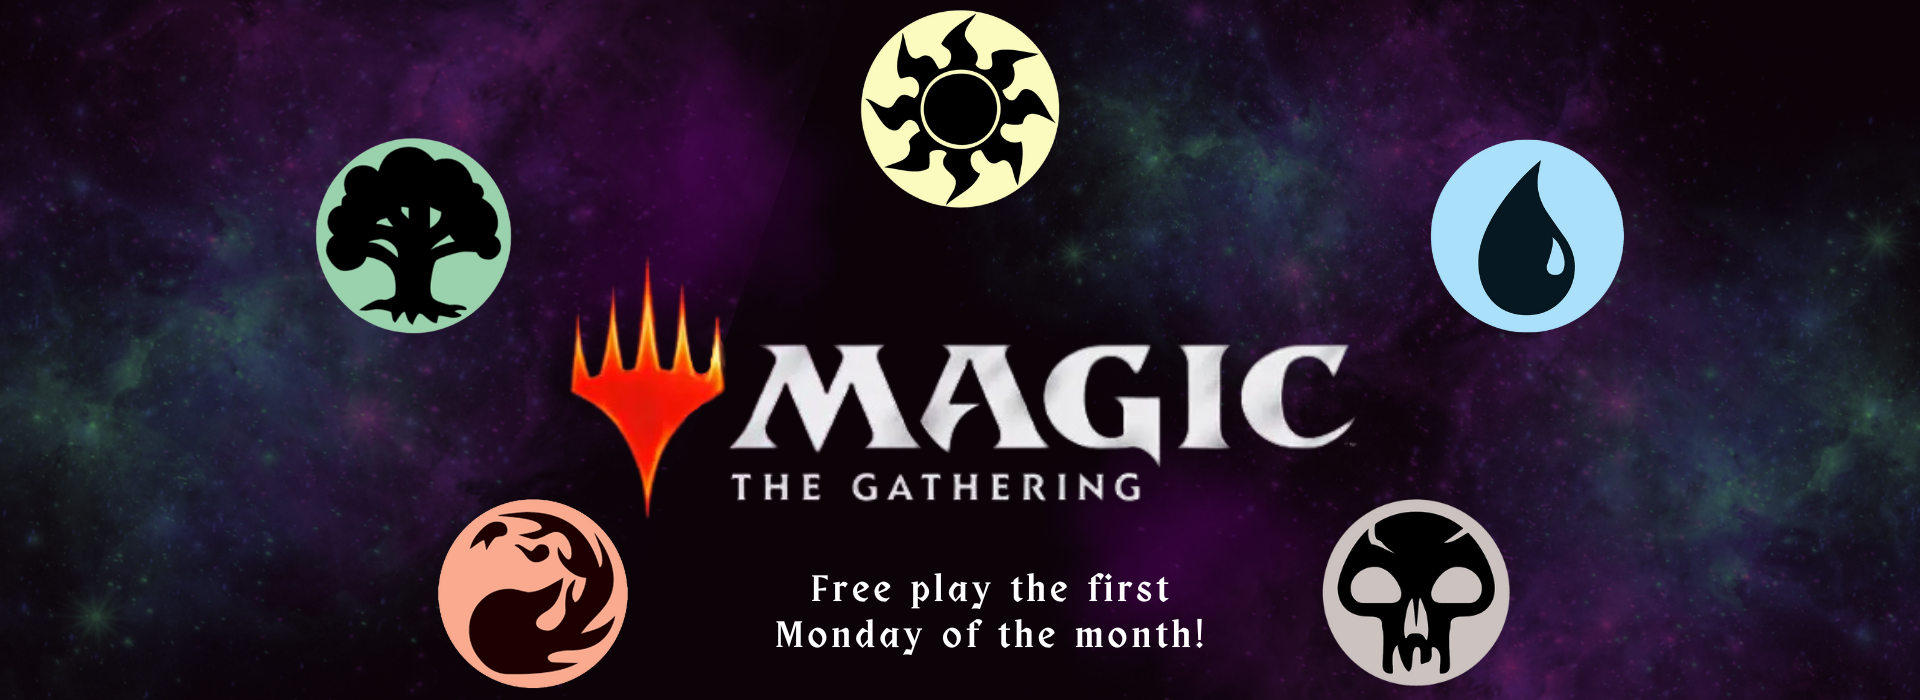 Magic the Gathering on April 1st at 5:30pm